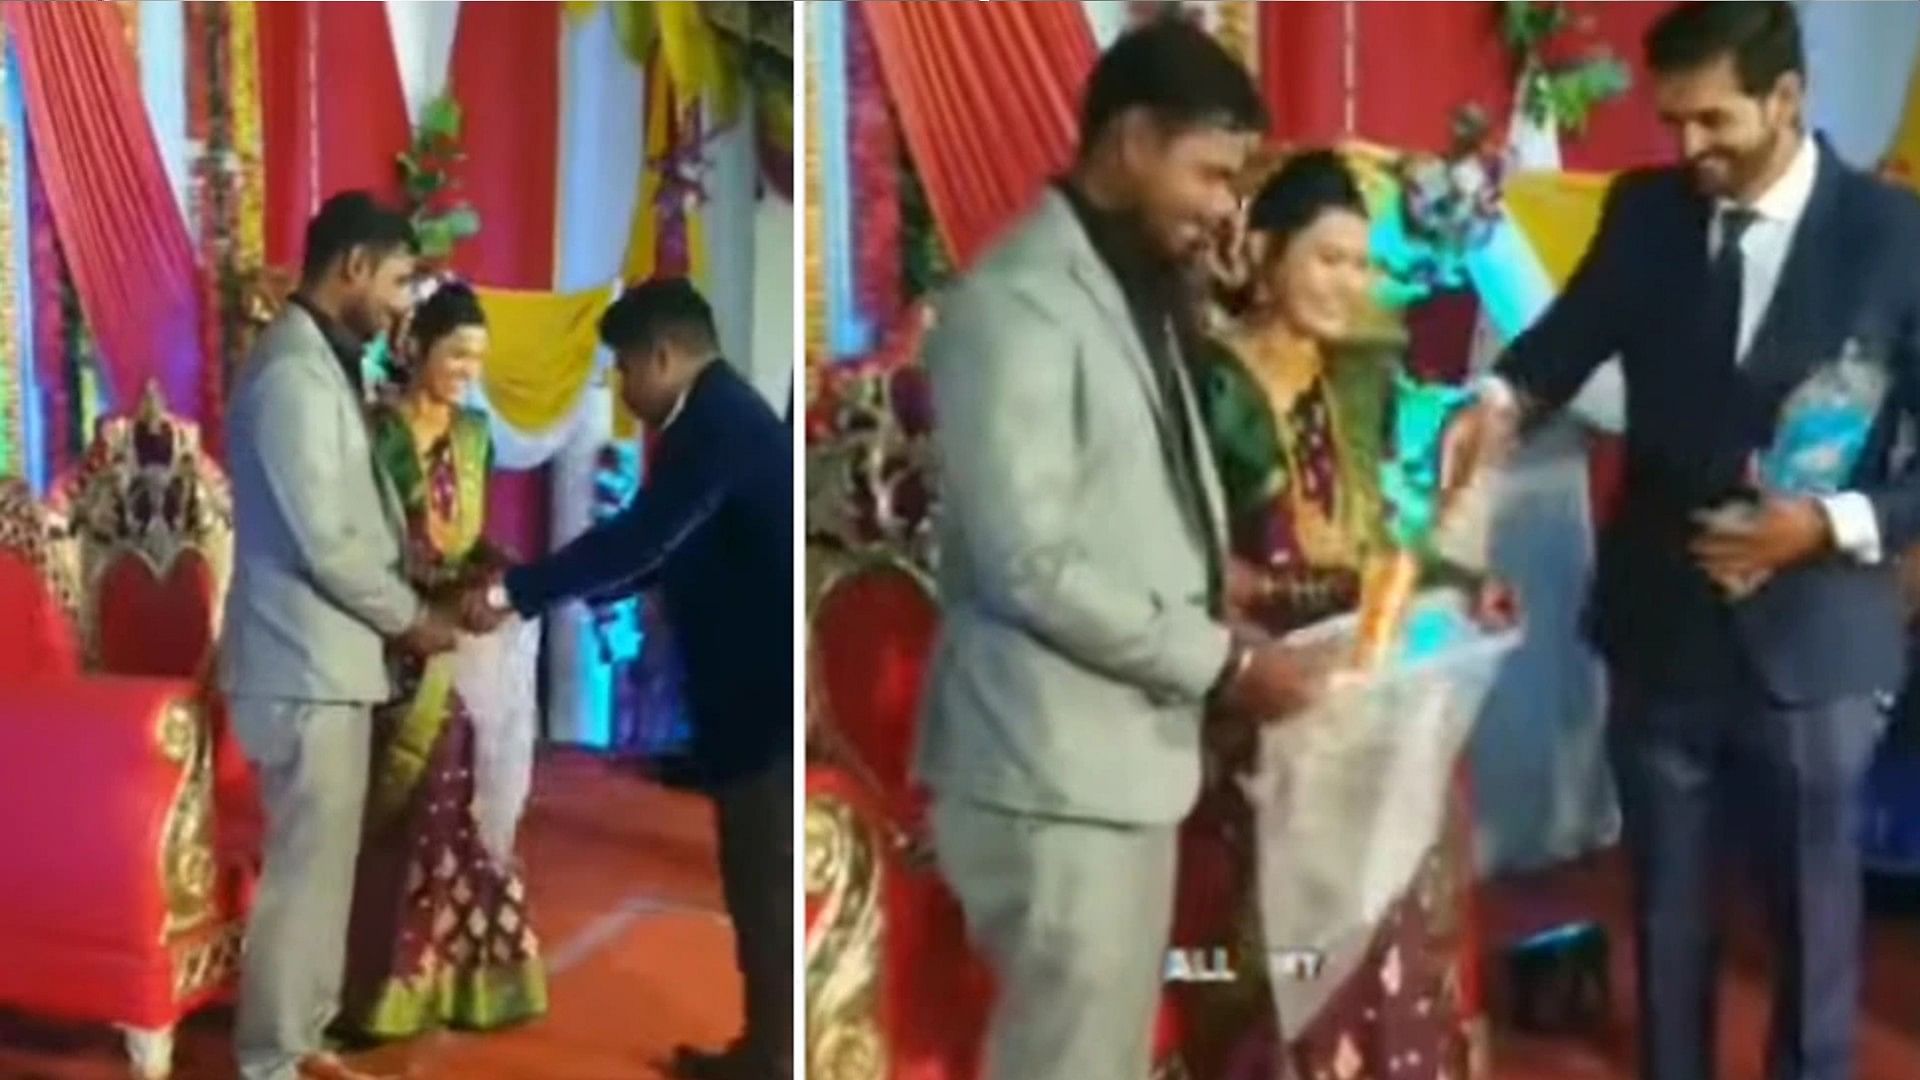 Friends did a funny joke in front of bride at the wedding groom became embarrassed